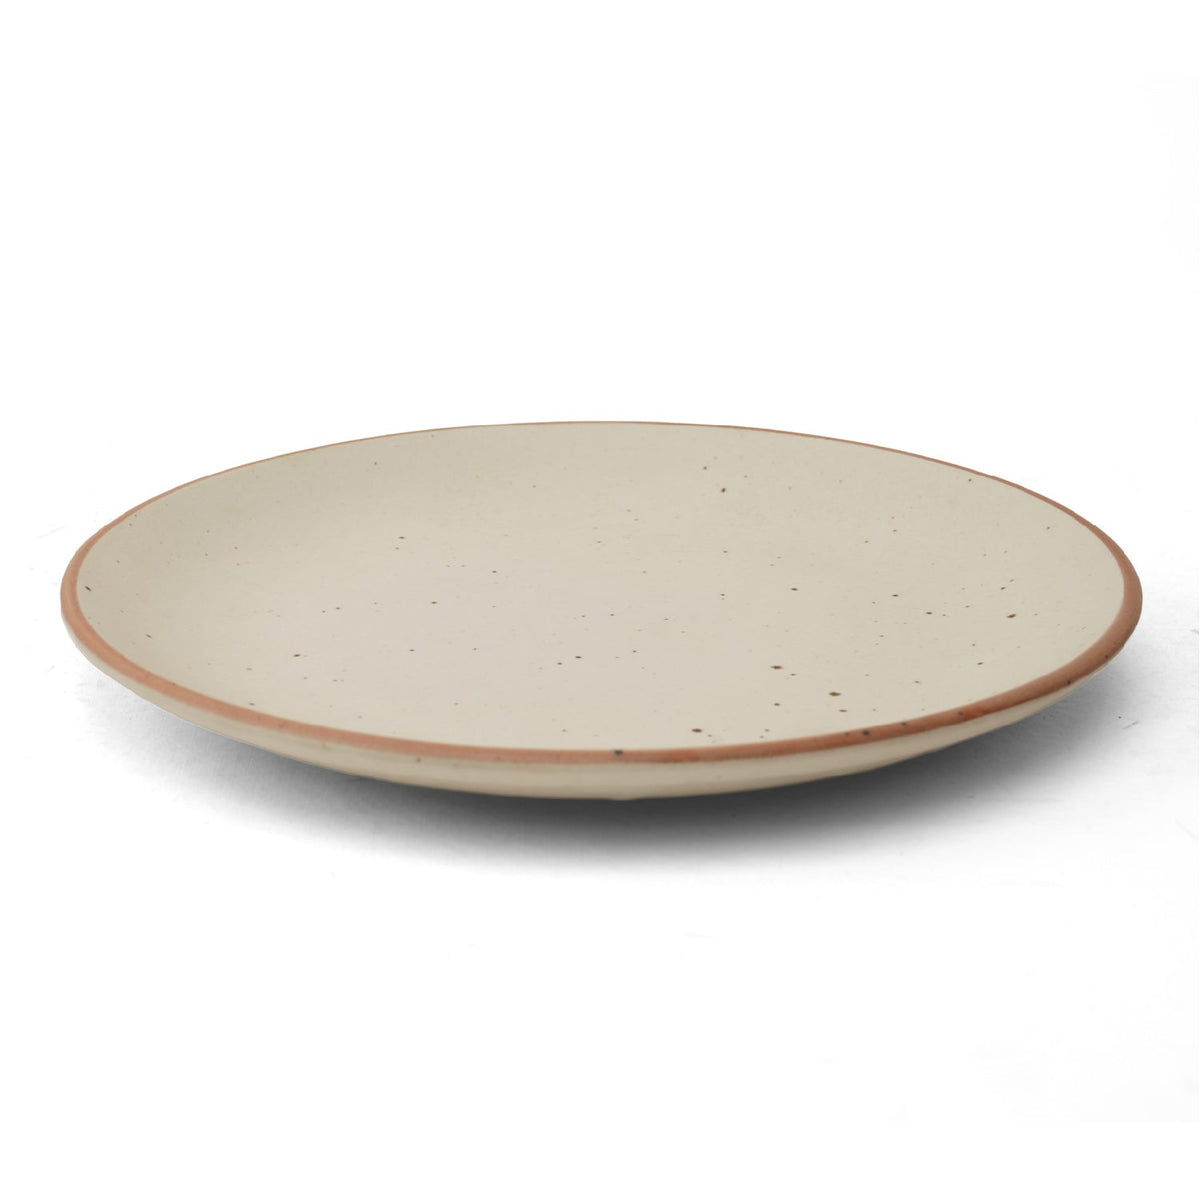 Claymistry Ceramic Dinner Plate Combo | Set of 2 | Biege with brown dots and borders (10 inch) | Ceramic Combos | Dinner Plates | Crockery | Dinnerware